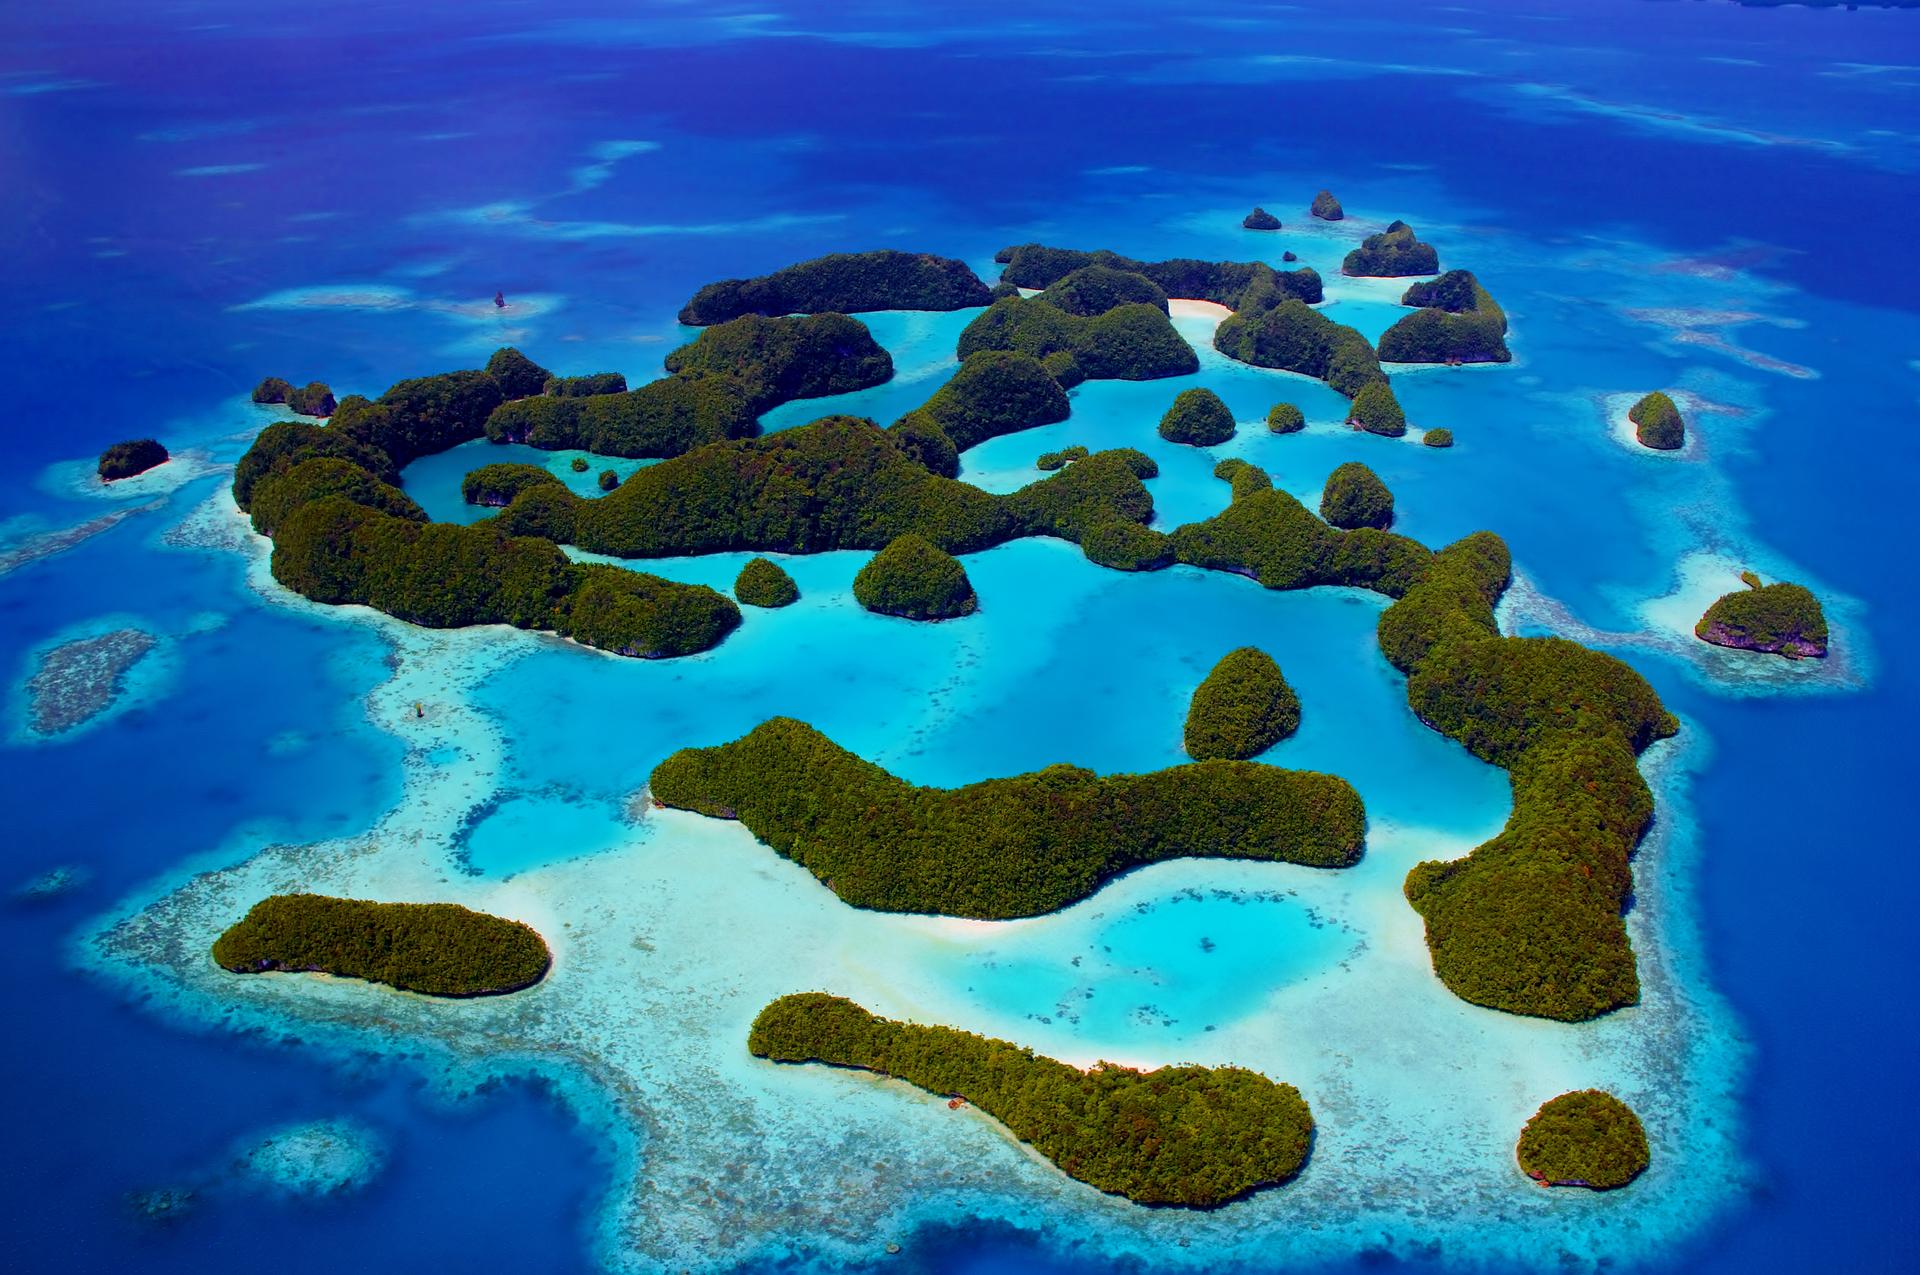 Conservationists are trying to protect the ocean waters around Palau, a small island nation in the South Pacific due east of the Philippines. The waters are recognized as one of the seven underwater wonders of the world, with more than 1,300 species of fi